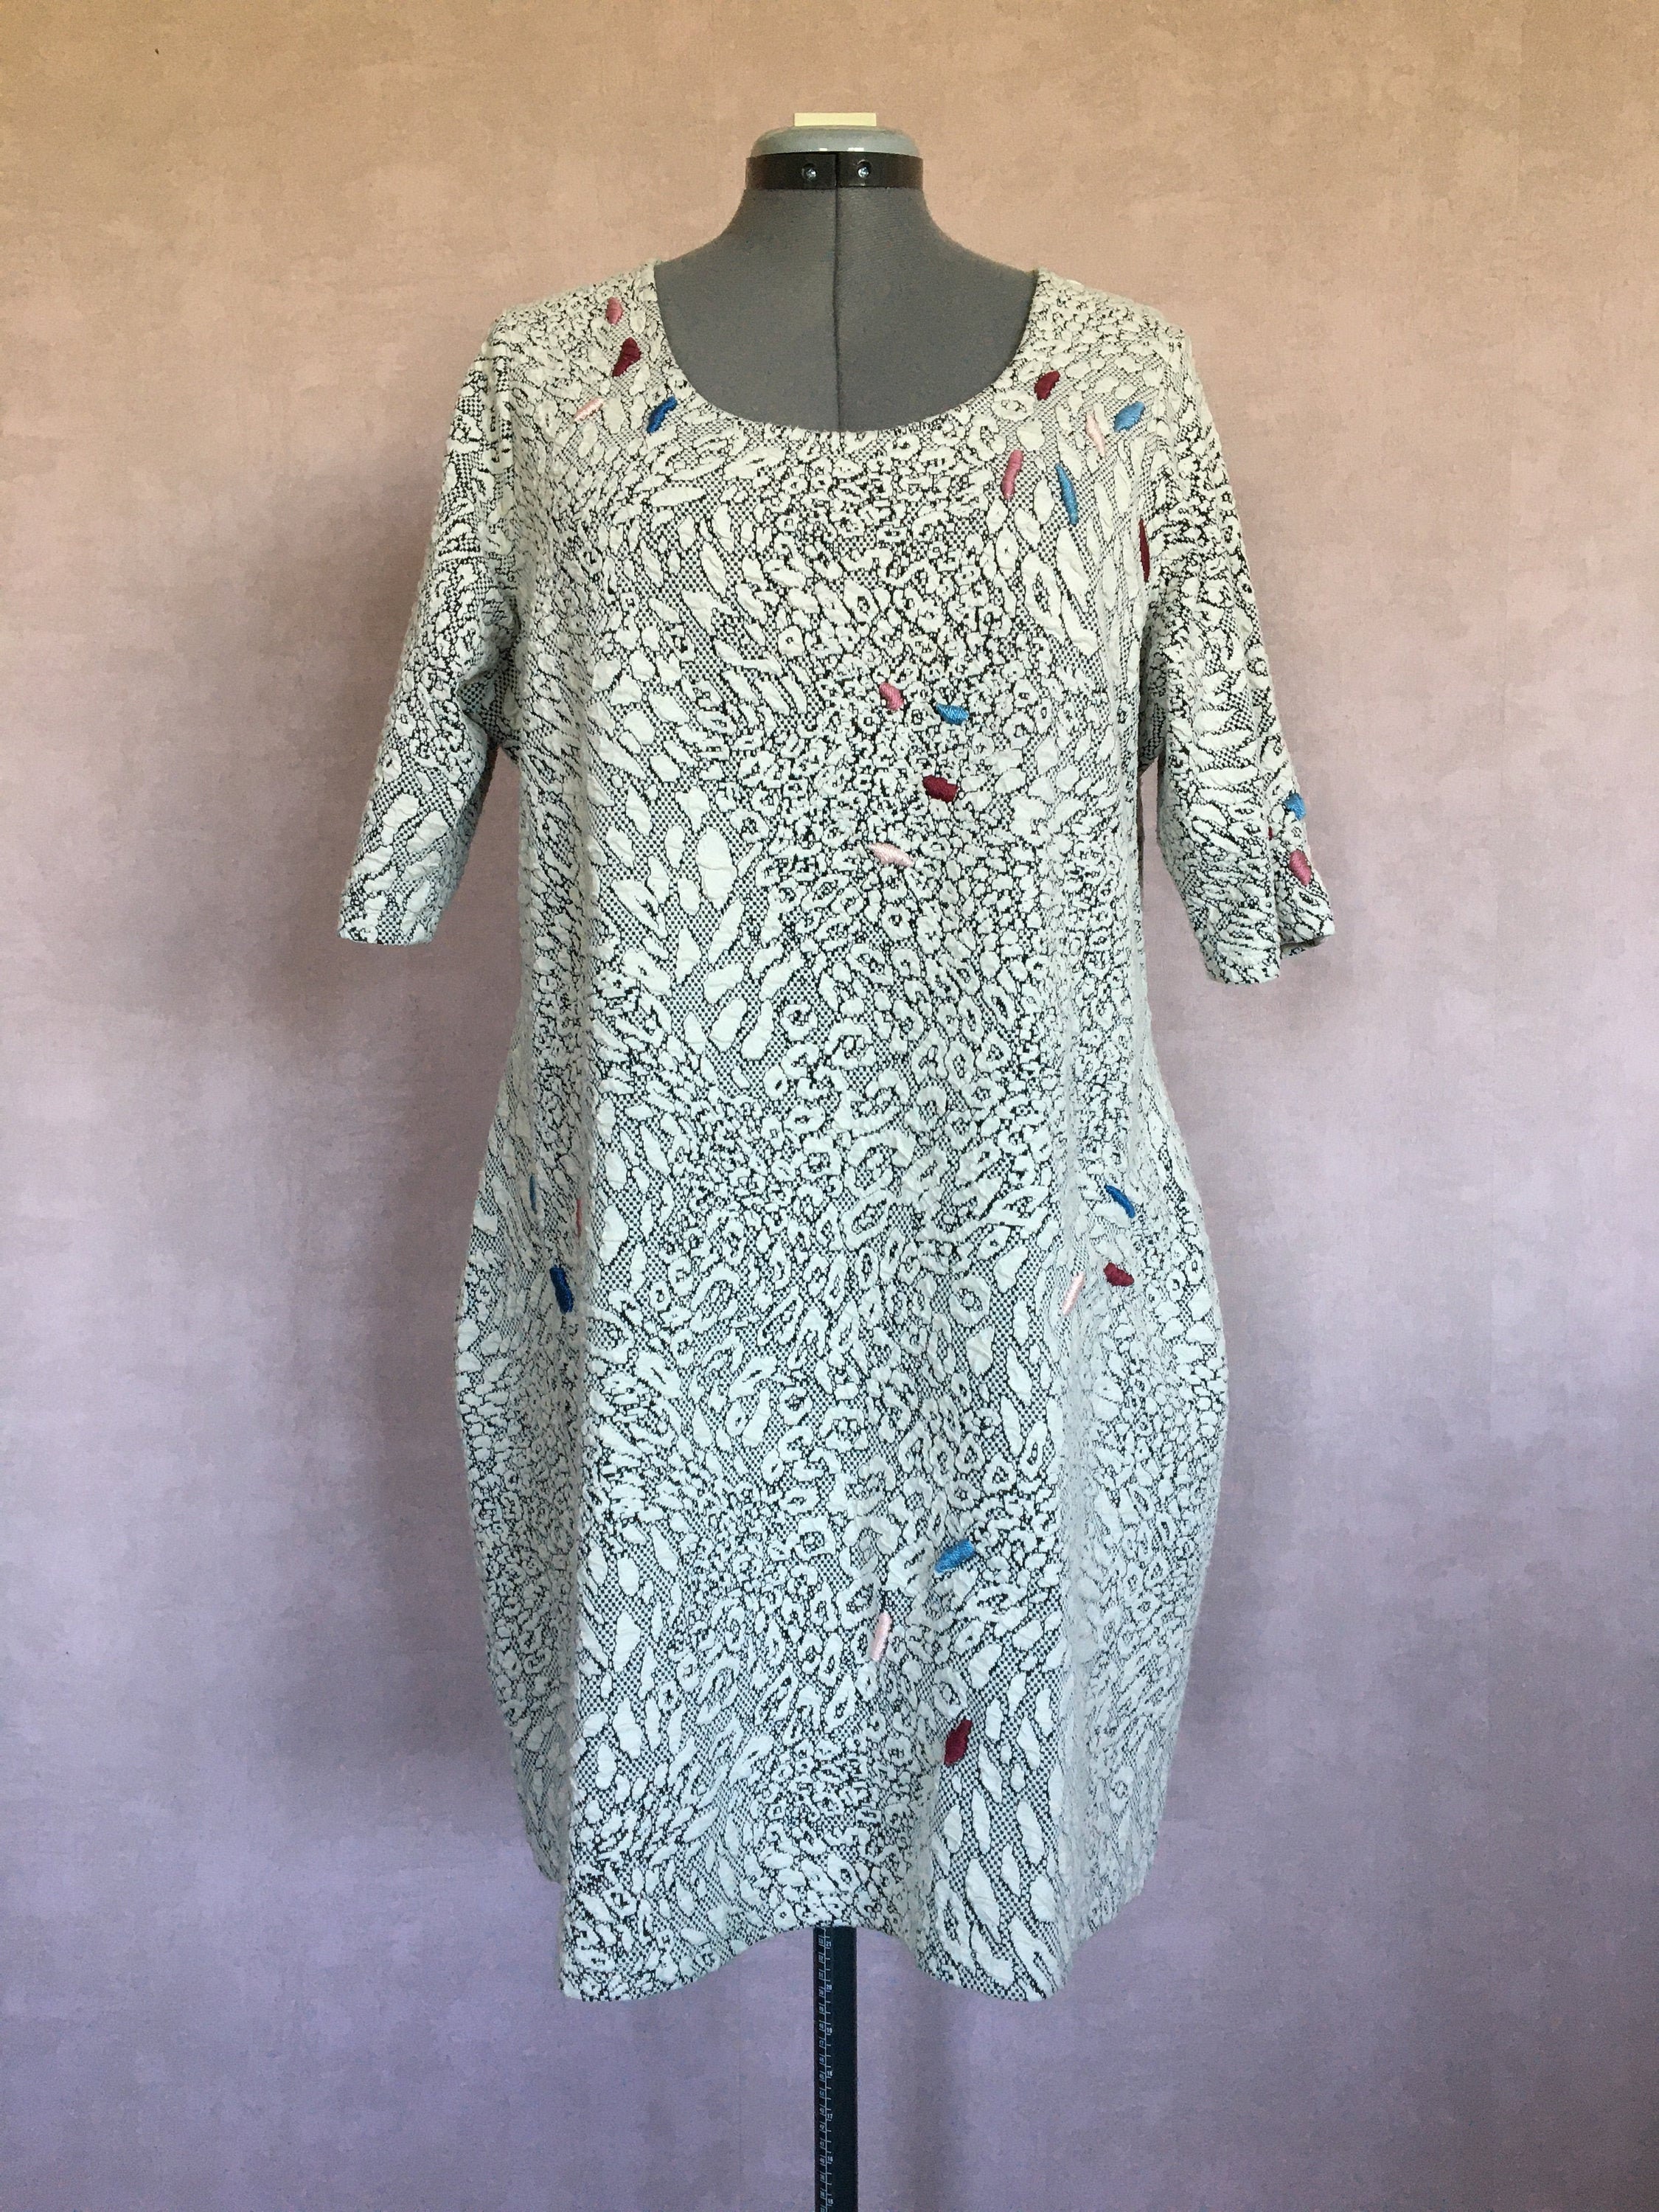 #253 hand embroidered jersey dress